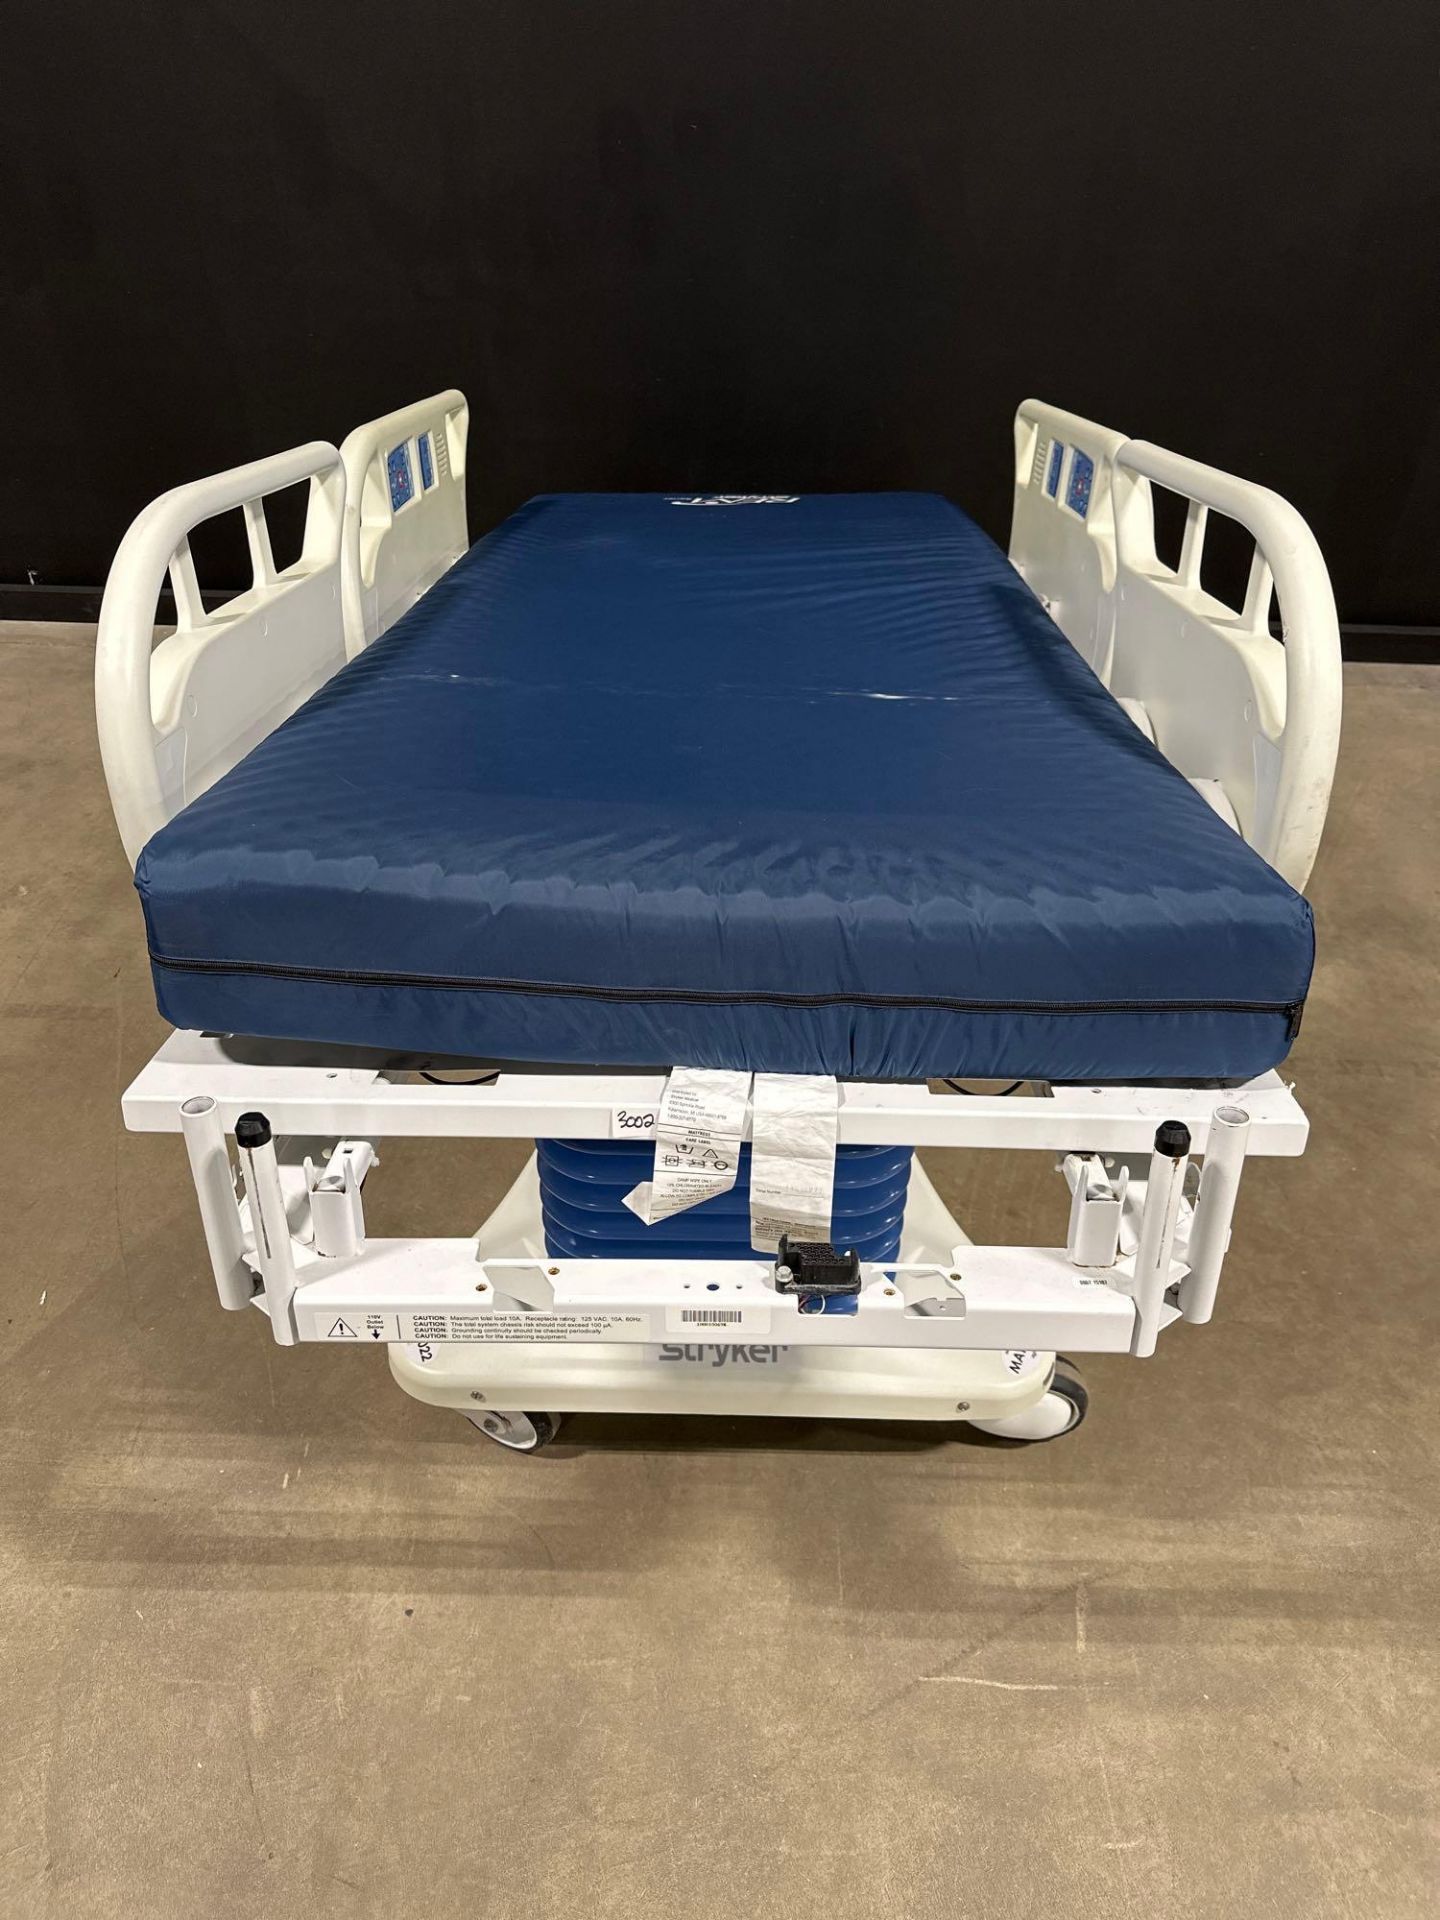 STRYKER 3002 S3 HOSPITAL BED - Image 2 of 4